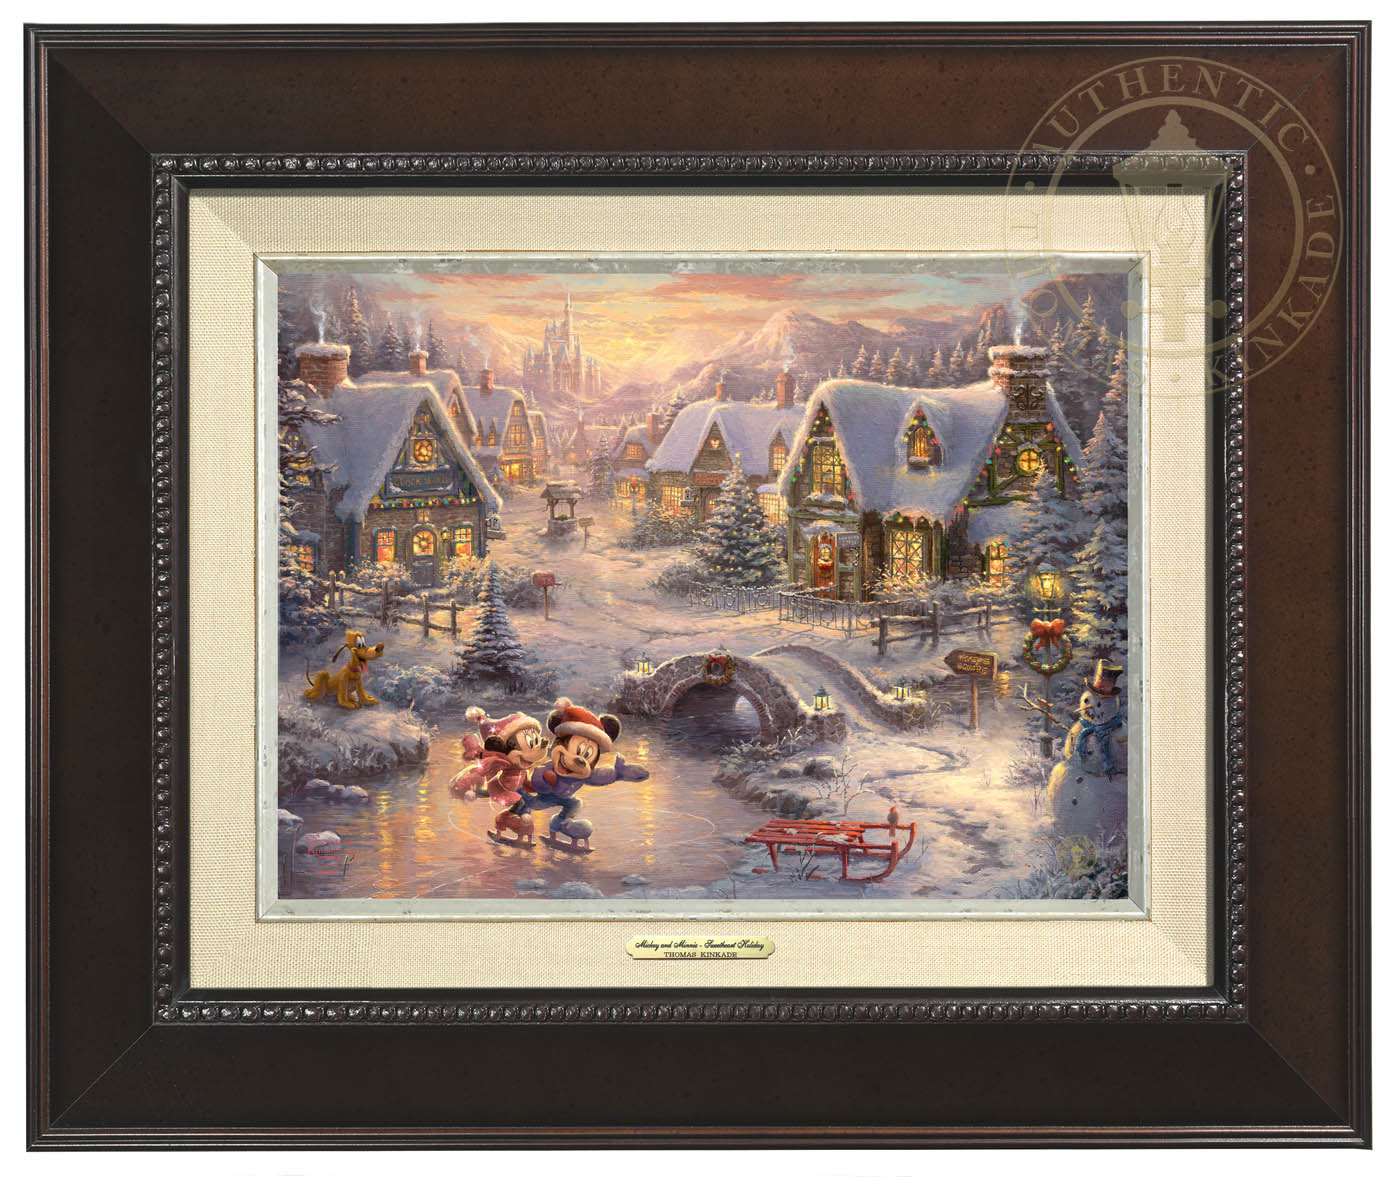 Mickey Mouse and Minnie Mouse joyfully skate across a frozen pond, celebrating the magic of the Holidays together. Espresso  Frame